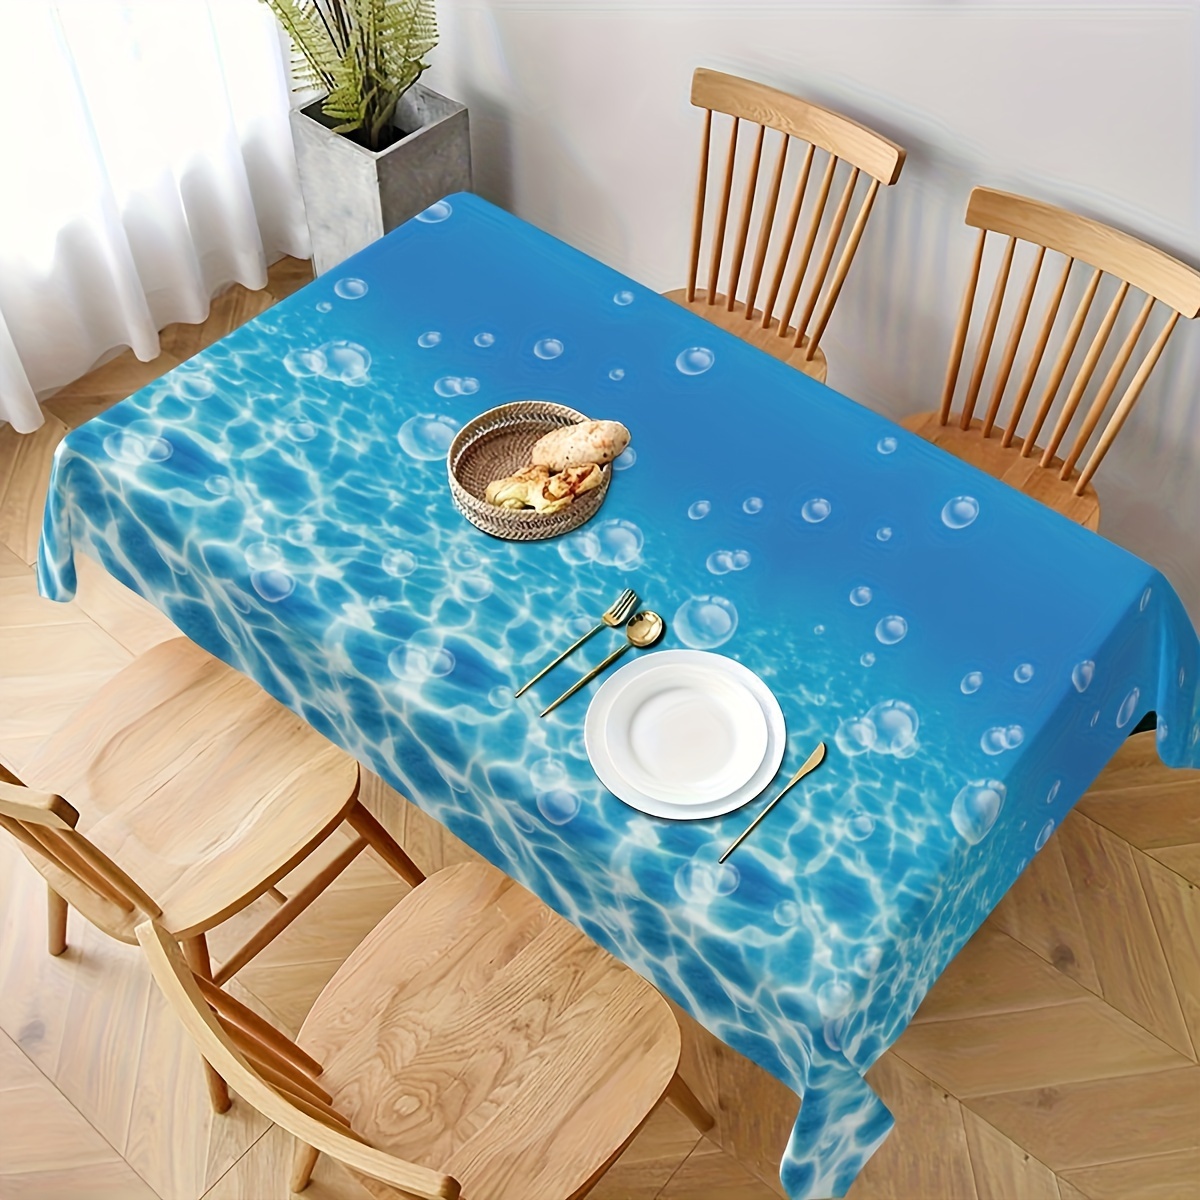 

2pcs Tropical Blue Sea Waves Wipeable Tablecloth, Kitchen Dining Desktop Decoration, Tablecloth For Outdoor And Indoor Use